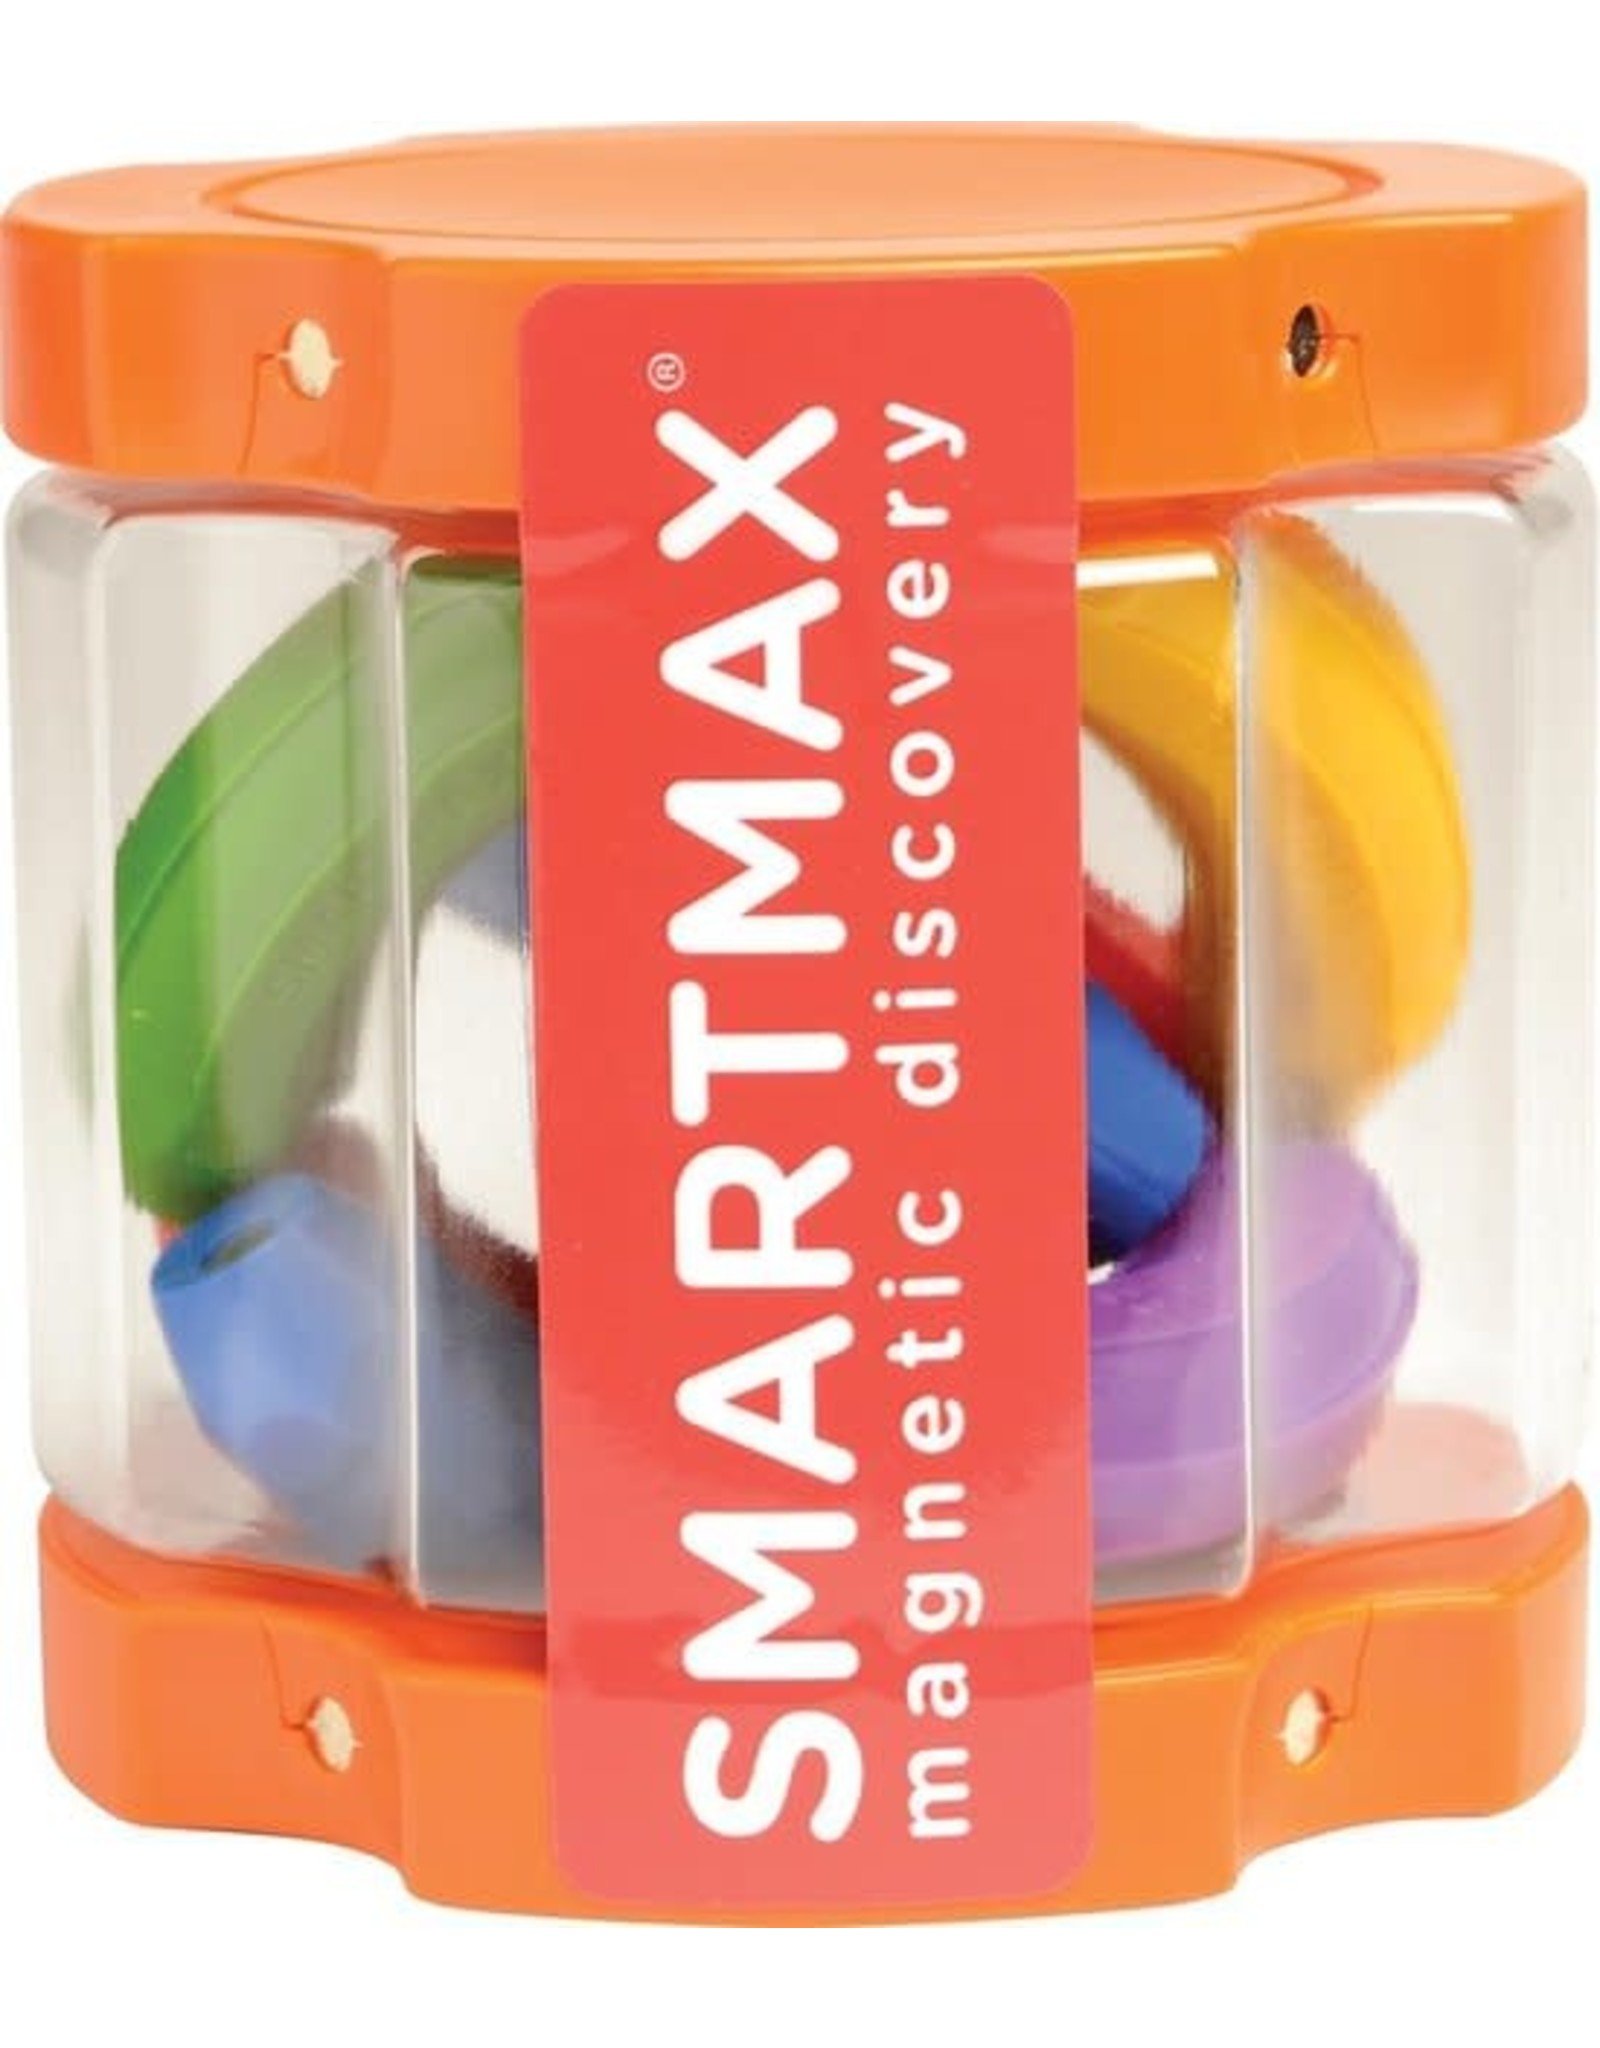 Smartmax SmartMax SMX 121 XT Set - 8 Curved Bars in Transparent Container